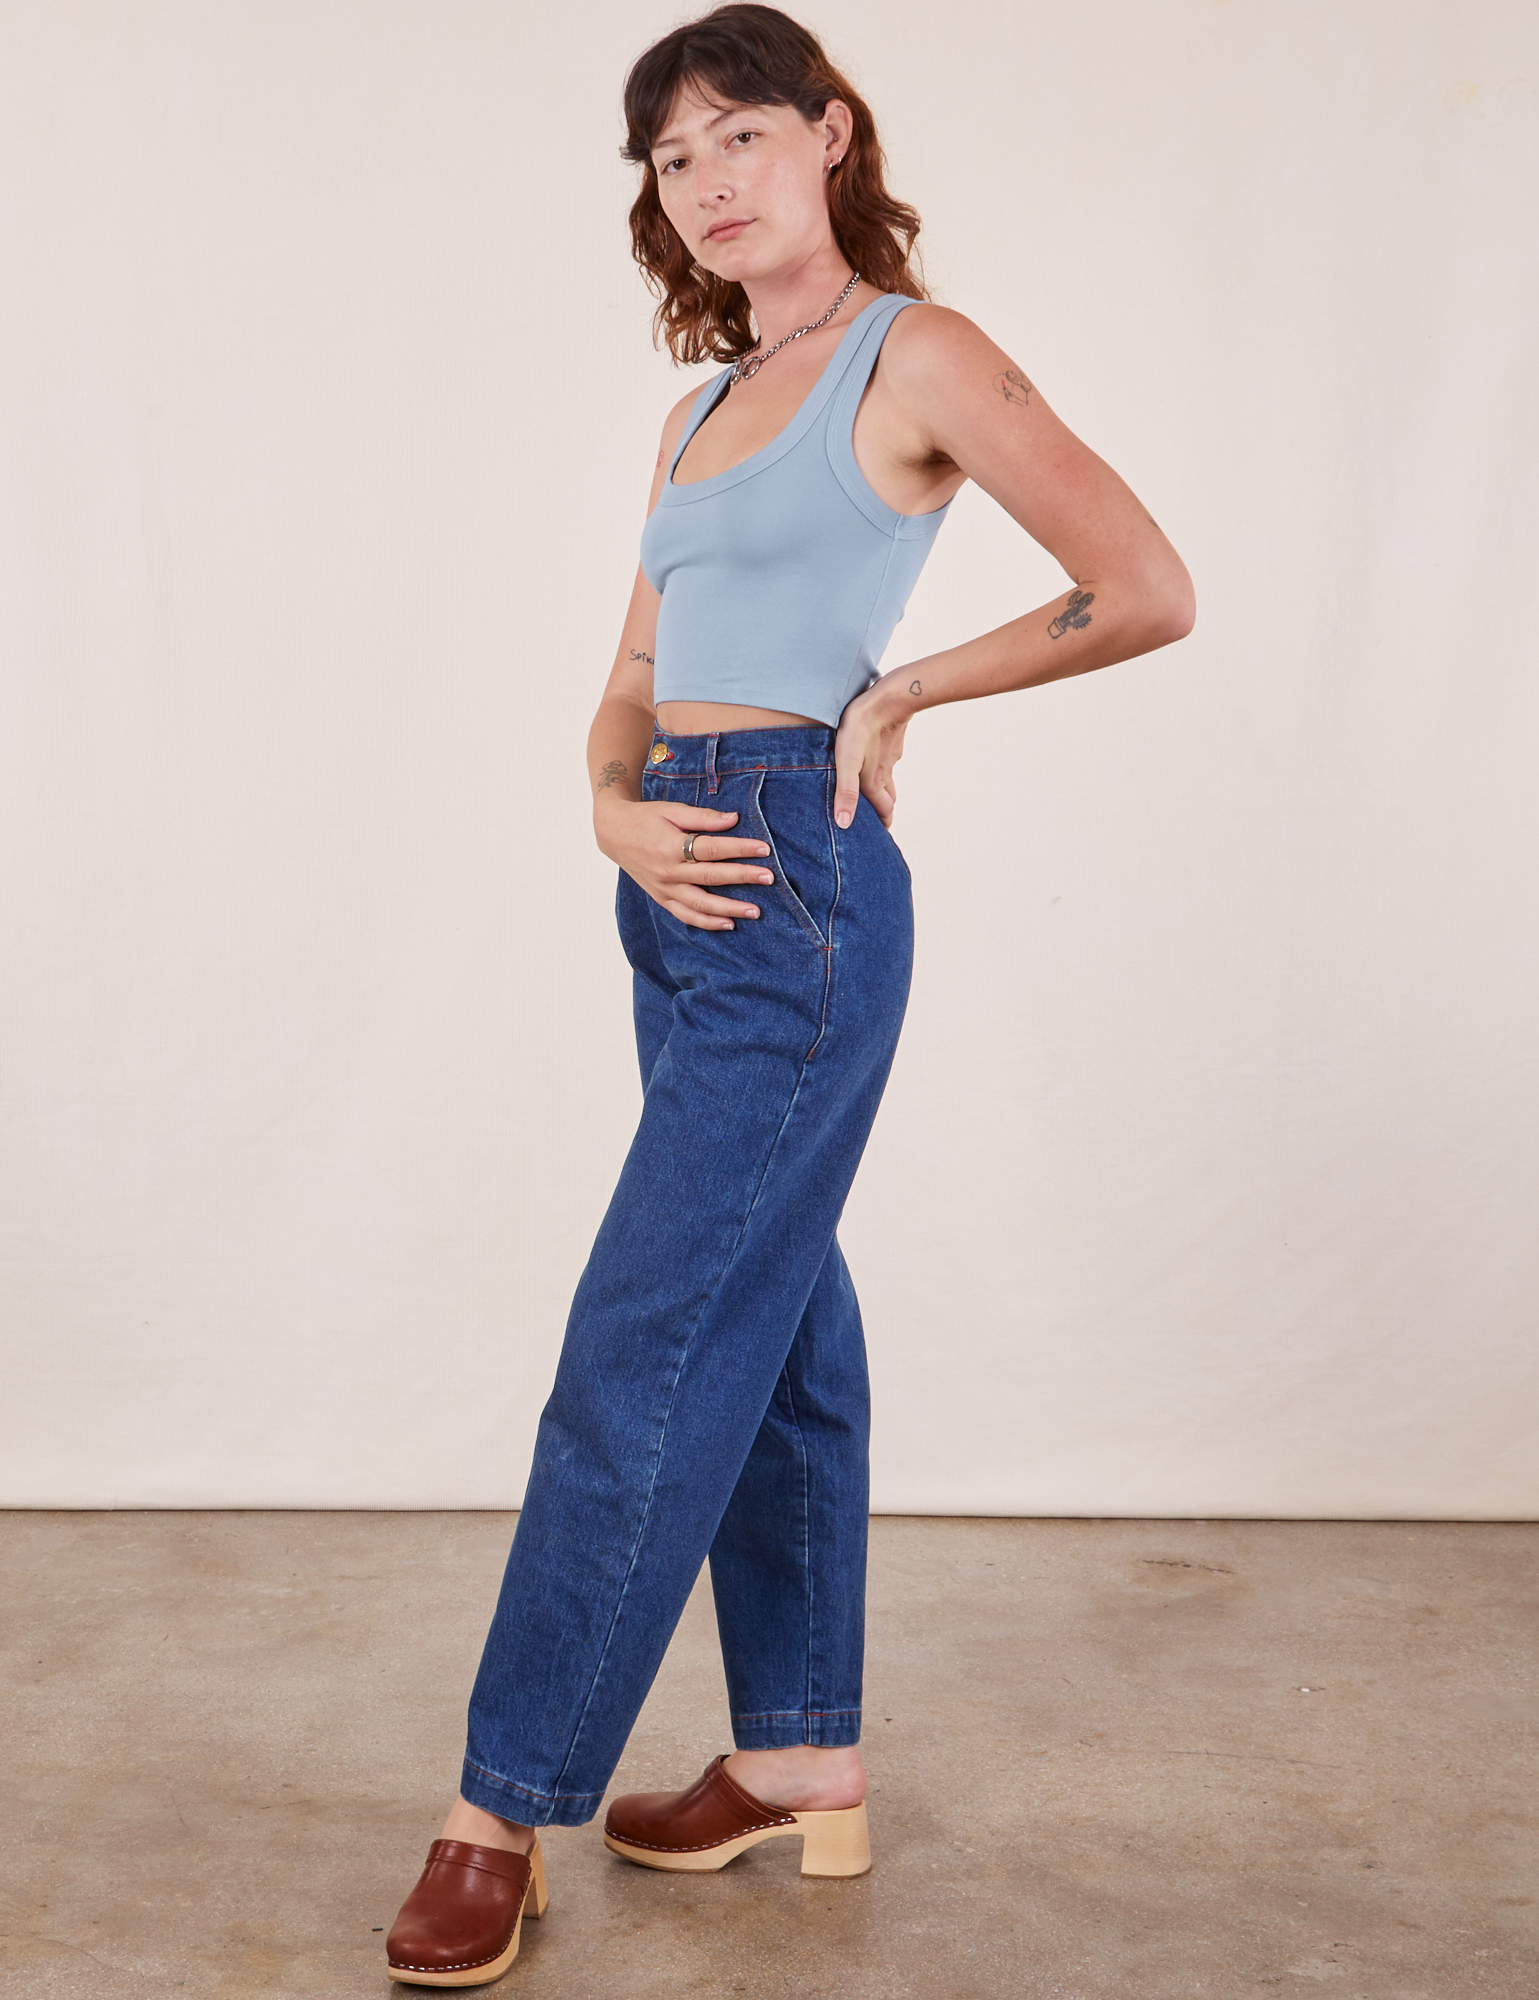 Angled front view of Cropped Tank Top in Periwinkle and dark wash Denim Trouser Jeans on Alex